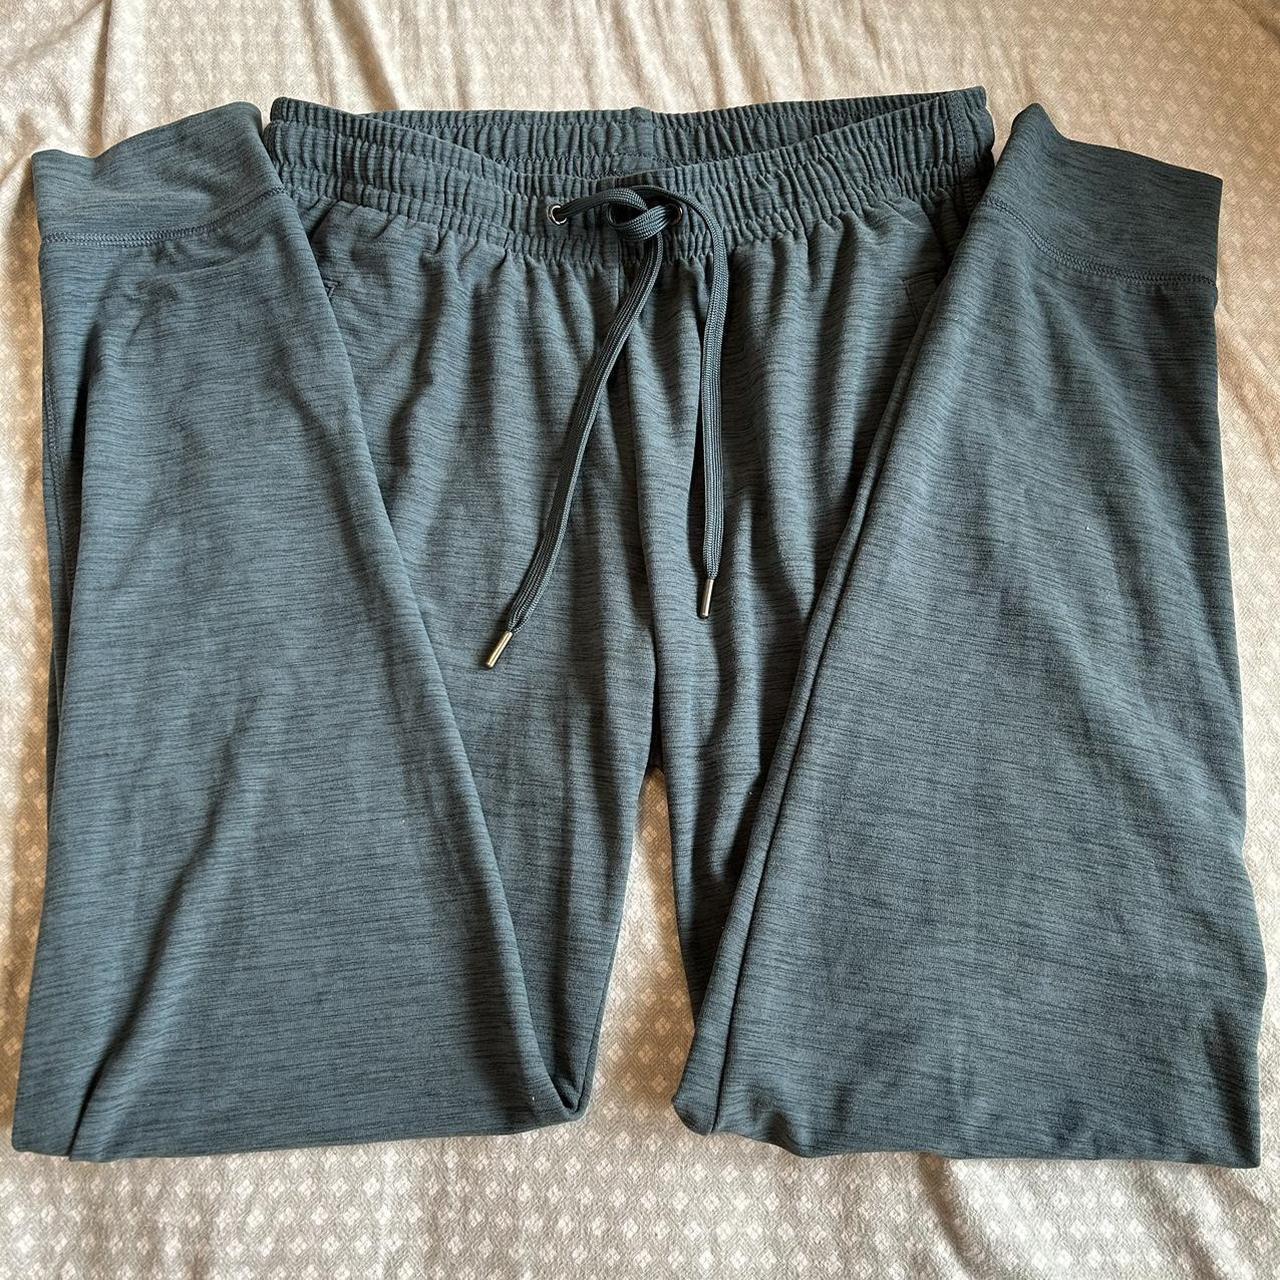 Women's Old Navy Large Teal Sweatpants printed with - Depop